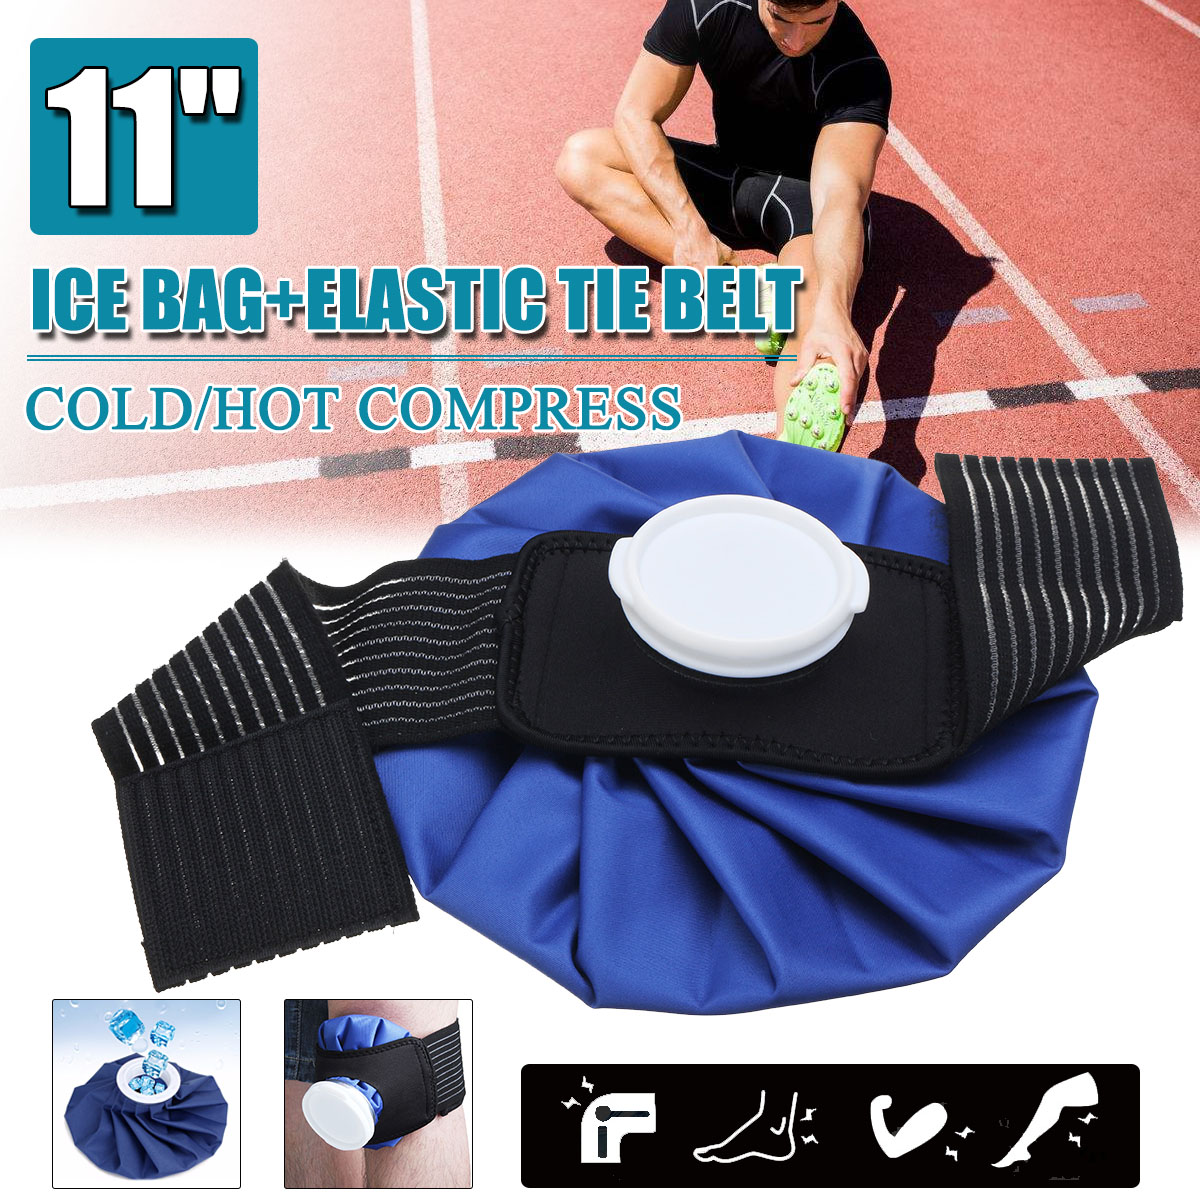 Ice-Bag-Pack-Pain-Relief-Cold-Broad-Knee-Shoulder-Injuries-Therapy-Strap-Wrap-Elastic-Tie-Belt-1551776-7